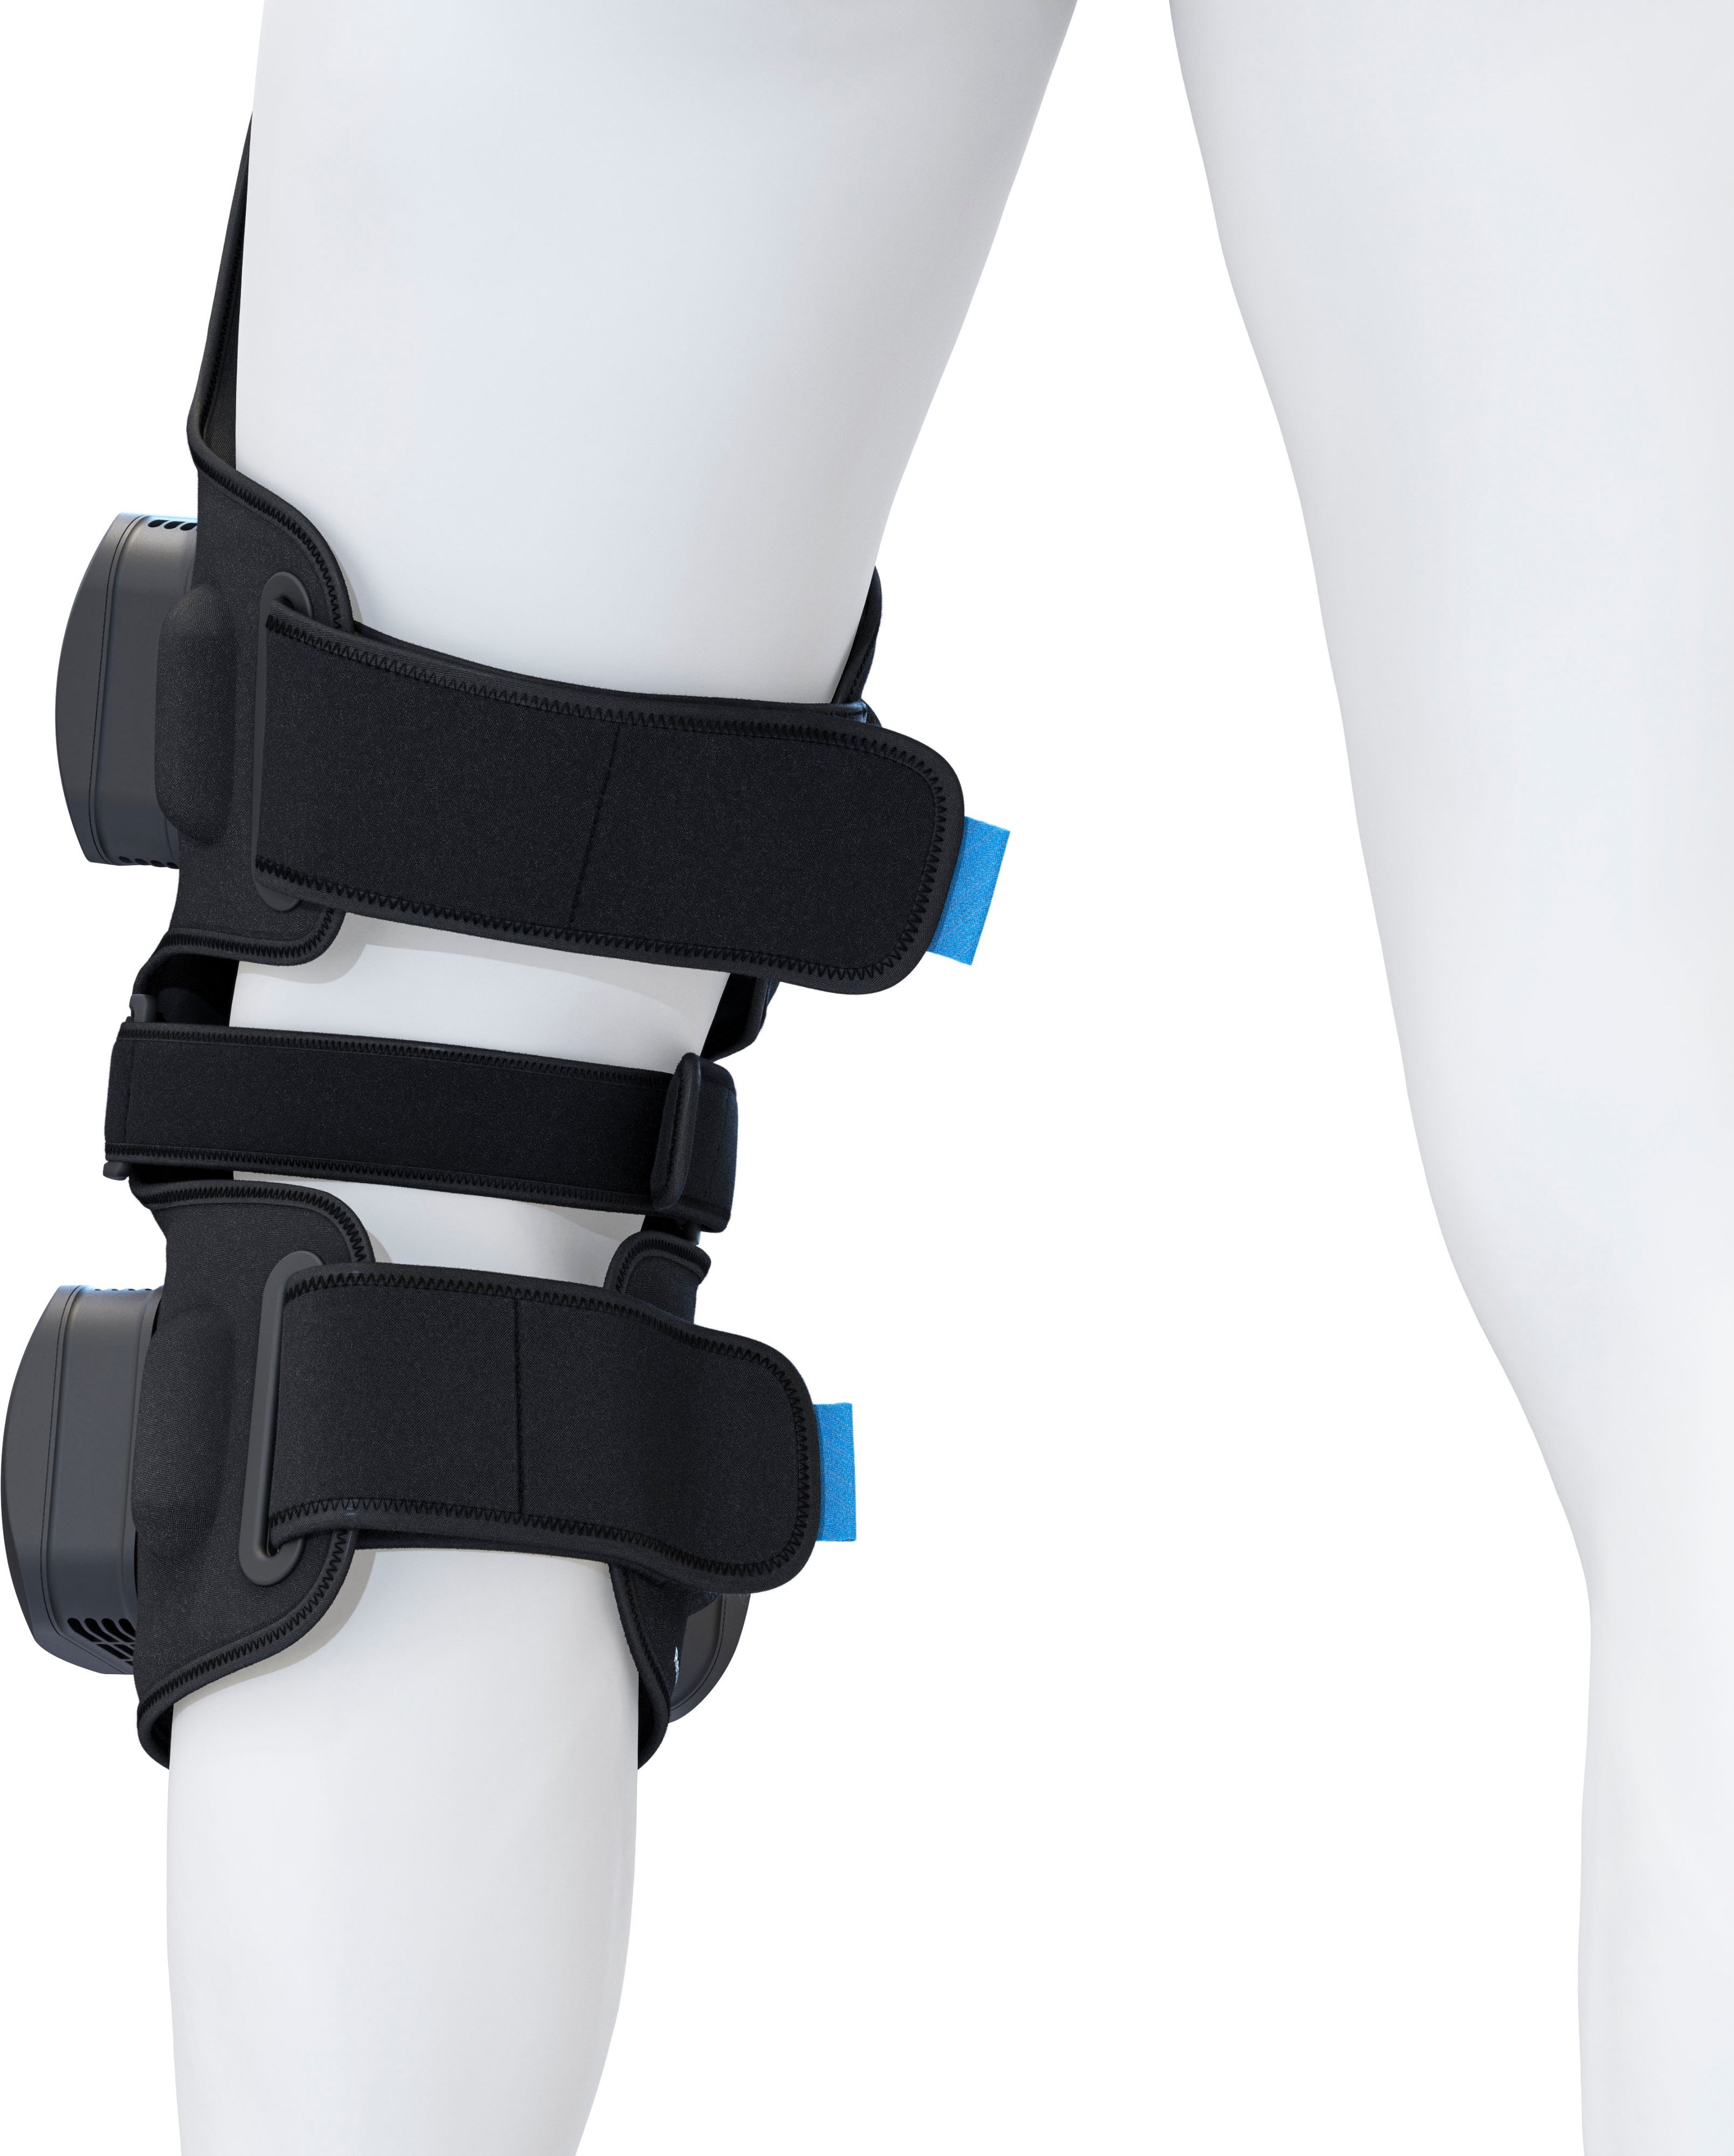 Therabody RecoveryTherm Hot and Cold Vibration Knee — Recovery For Athletes